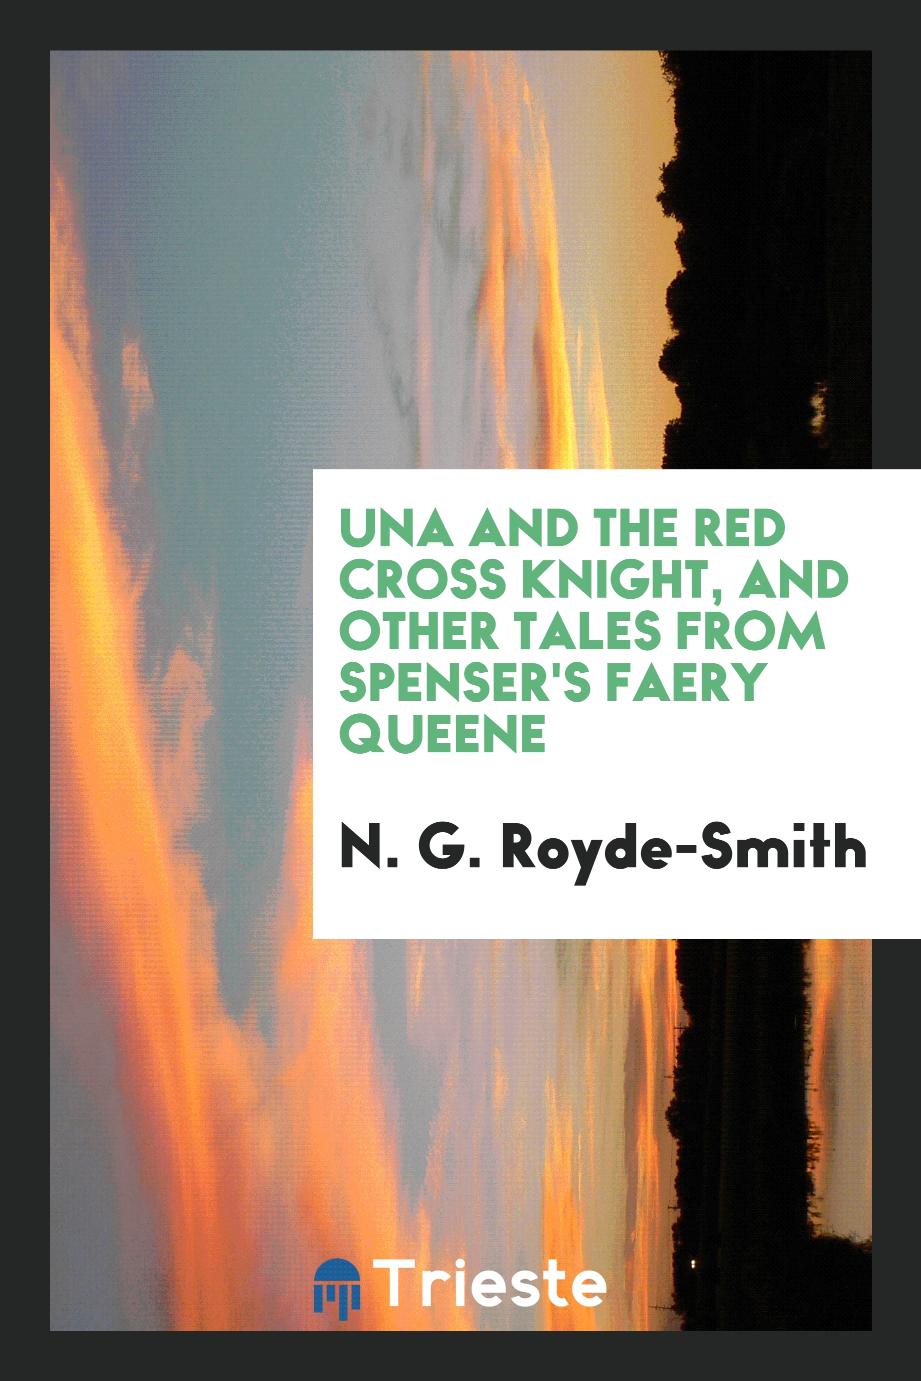 Una and the red cross knight, and other tales from Spenser's Faery Queene